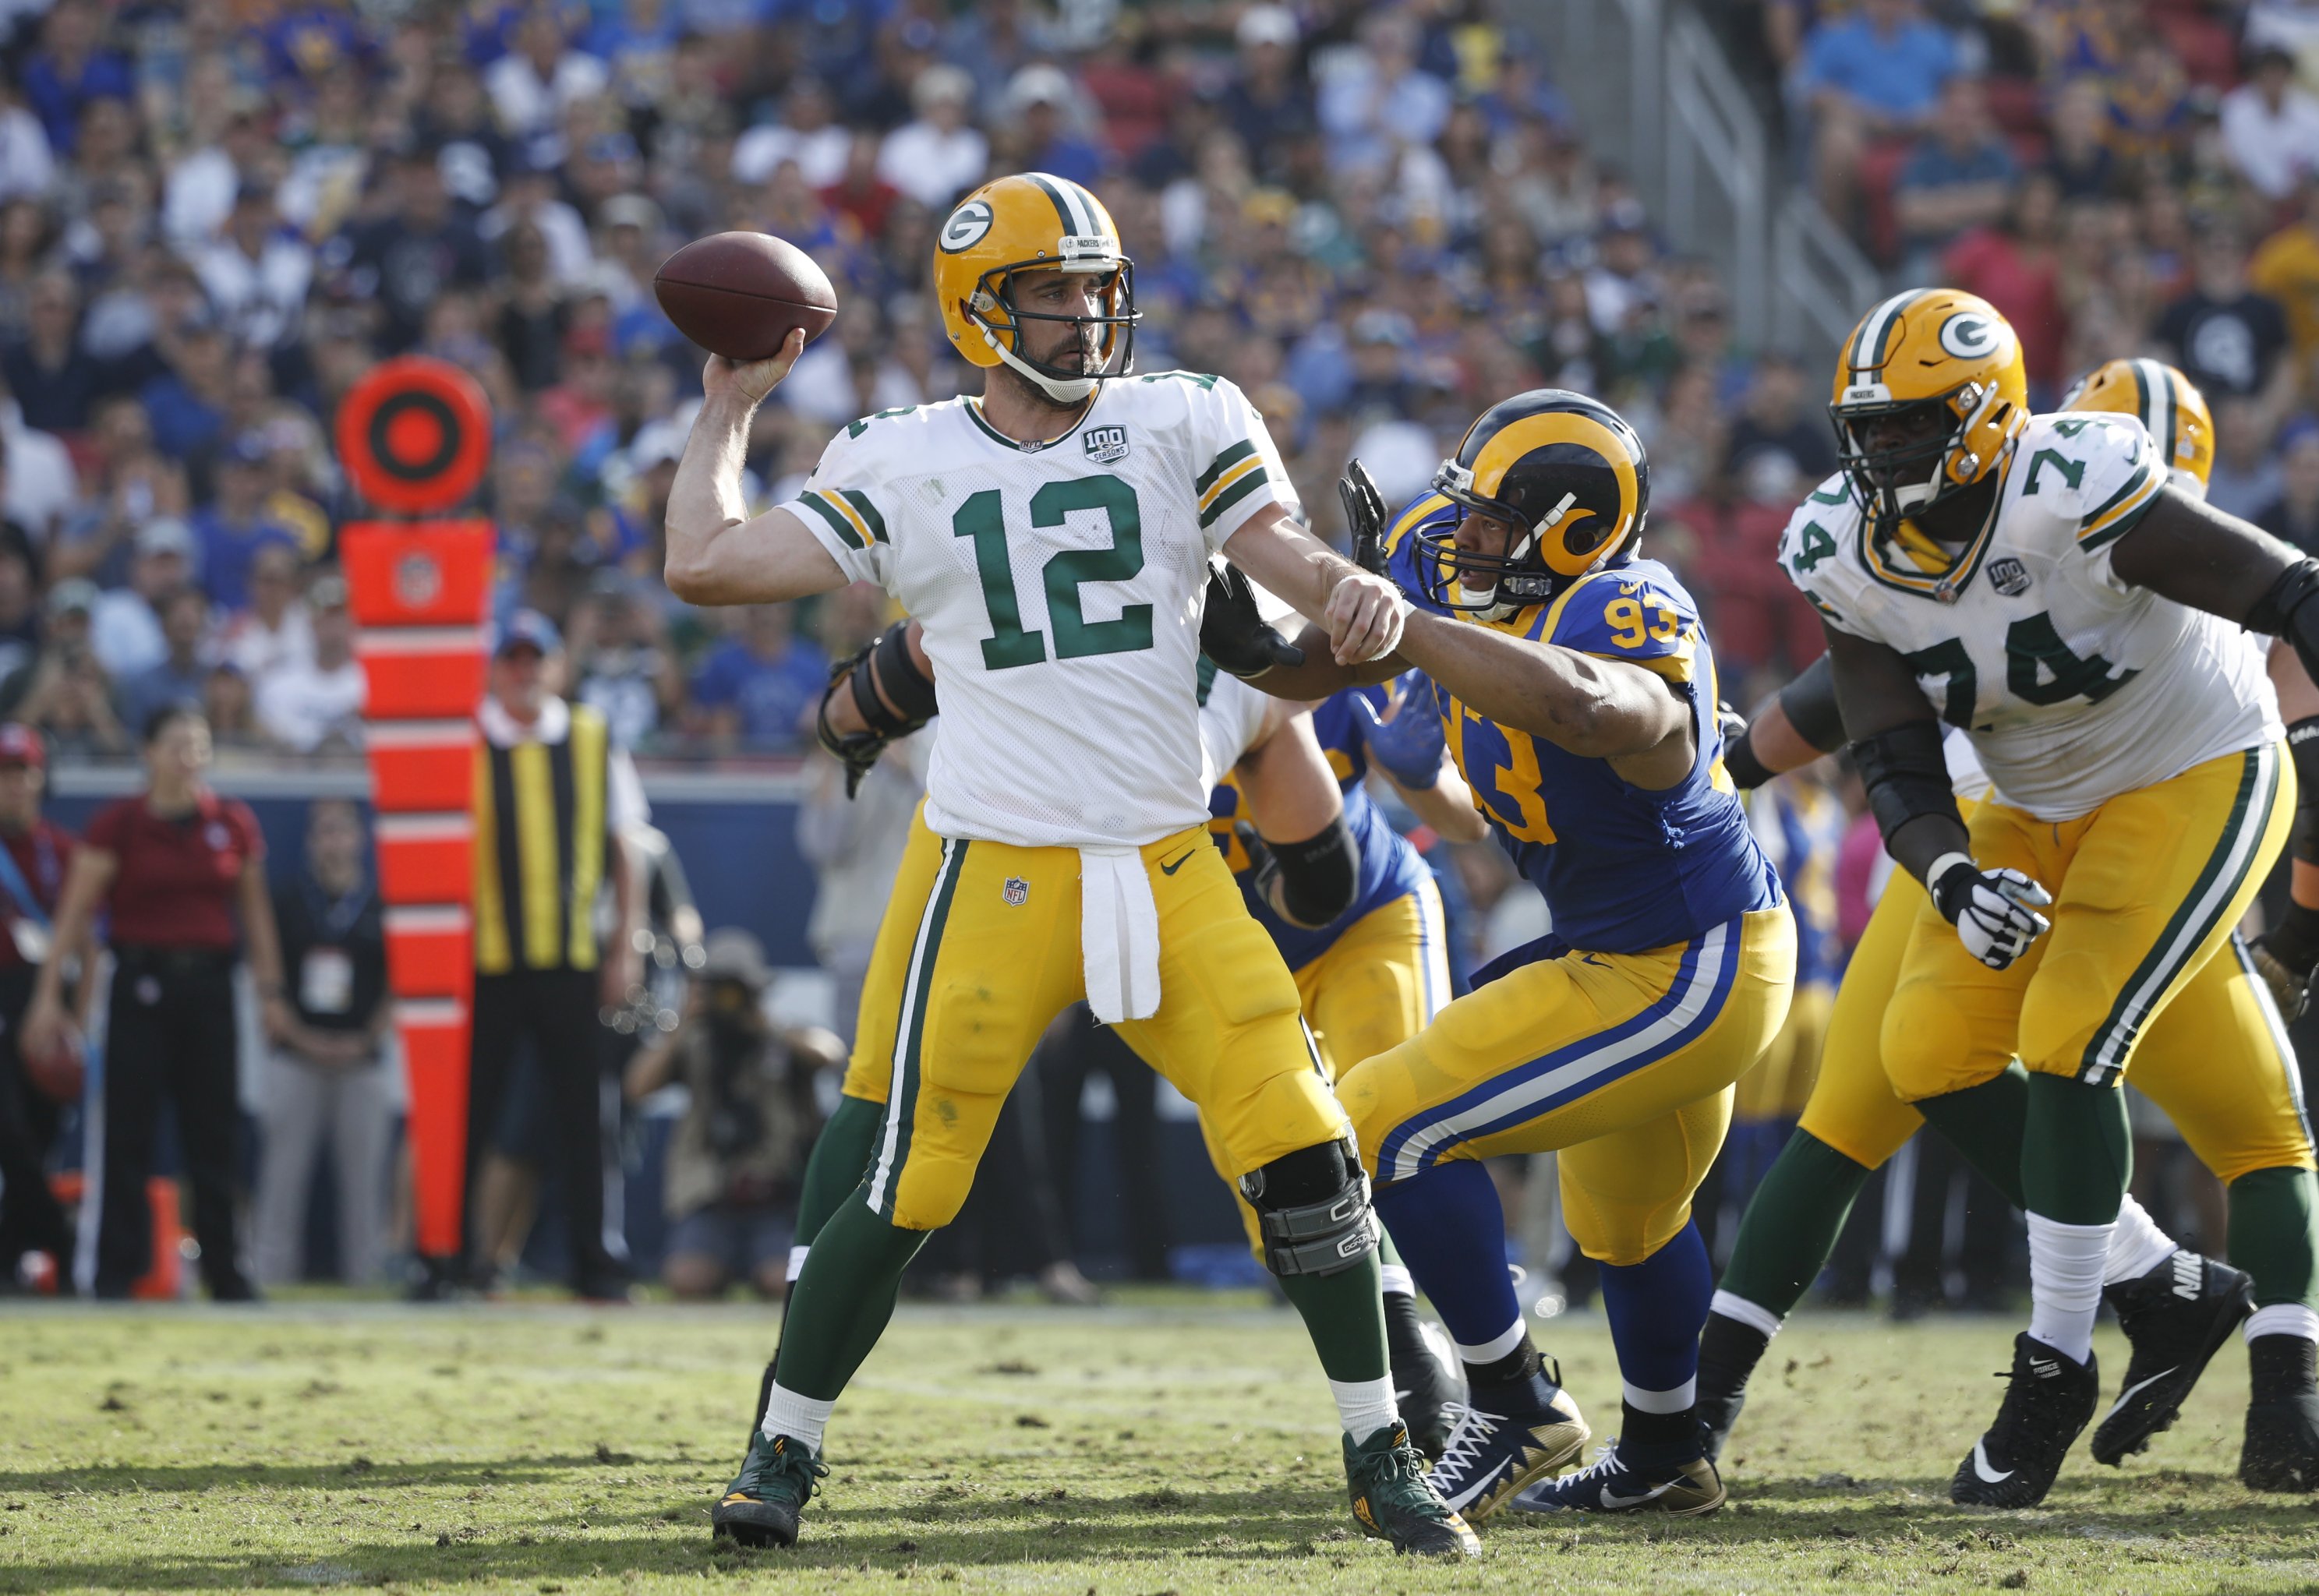 NFC North Title Race, Standings, Playoff Tie-Breakers - Acme Packing Company